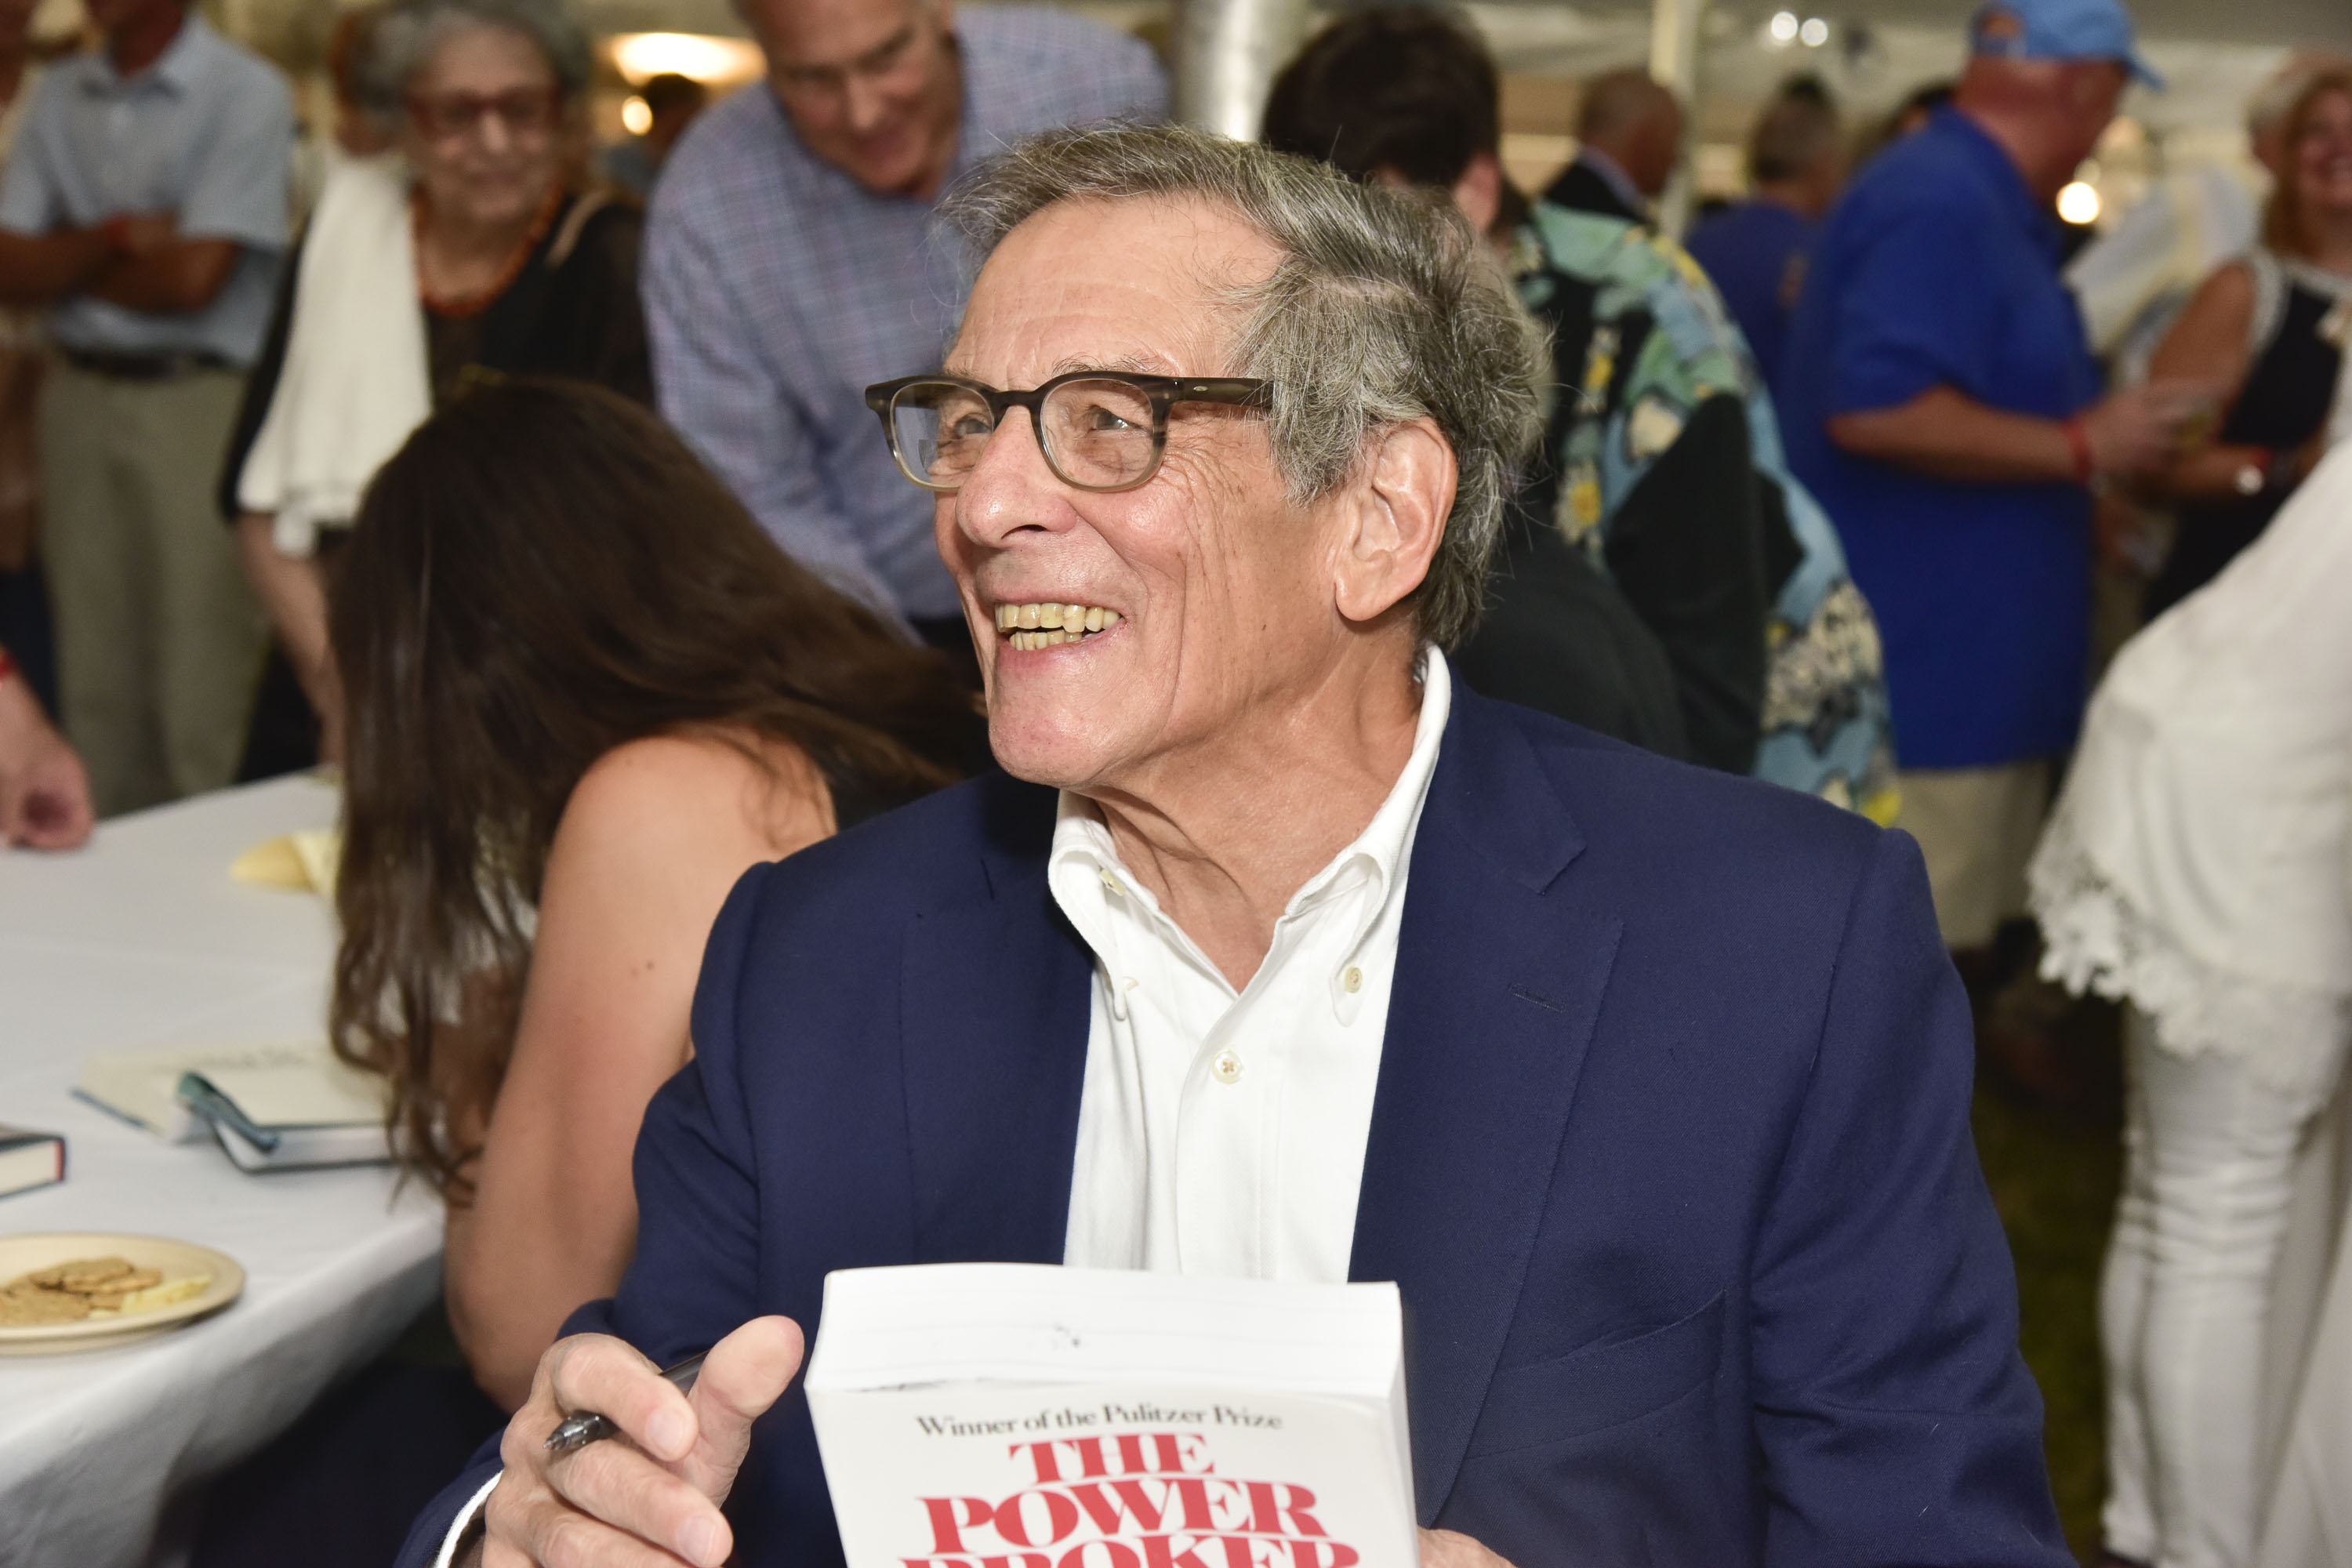 Author Robert Caro with his book "The Power Broker"